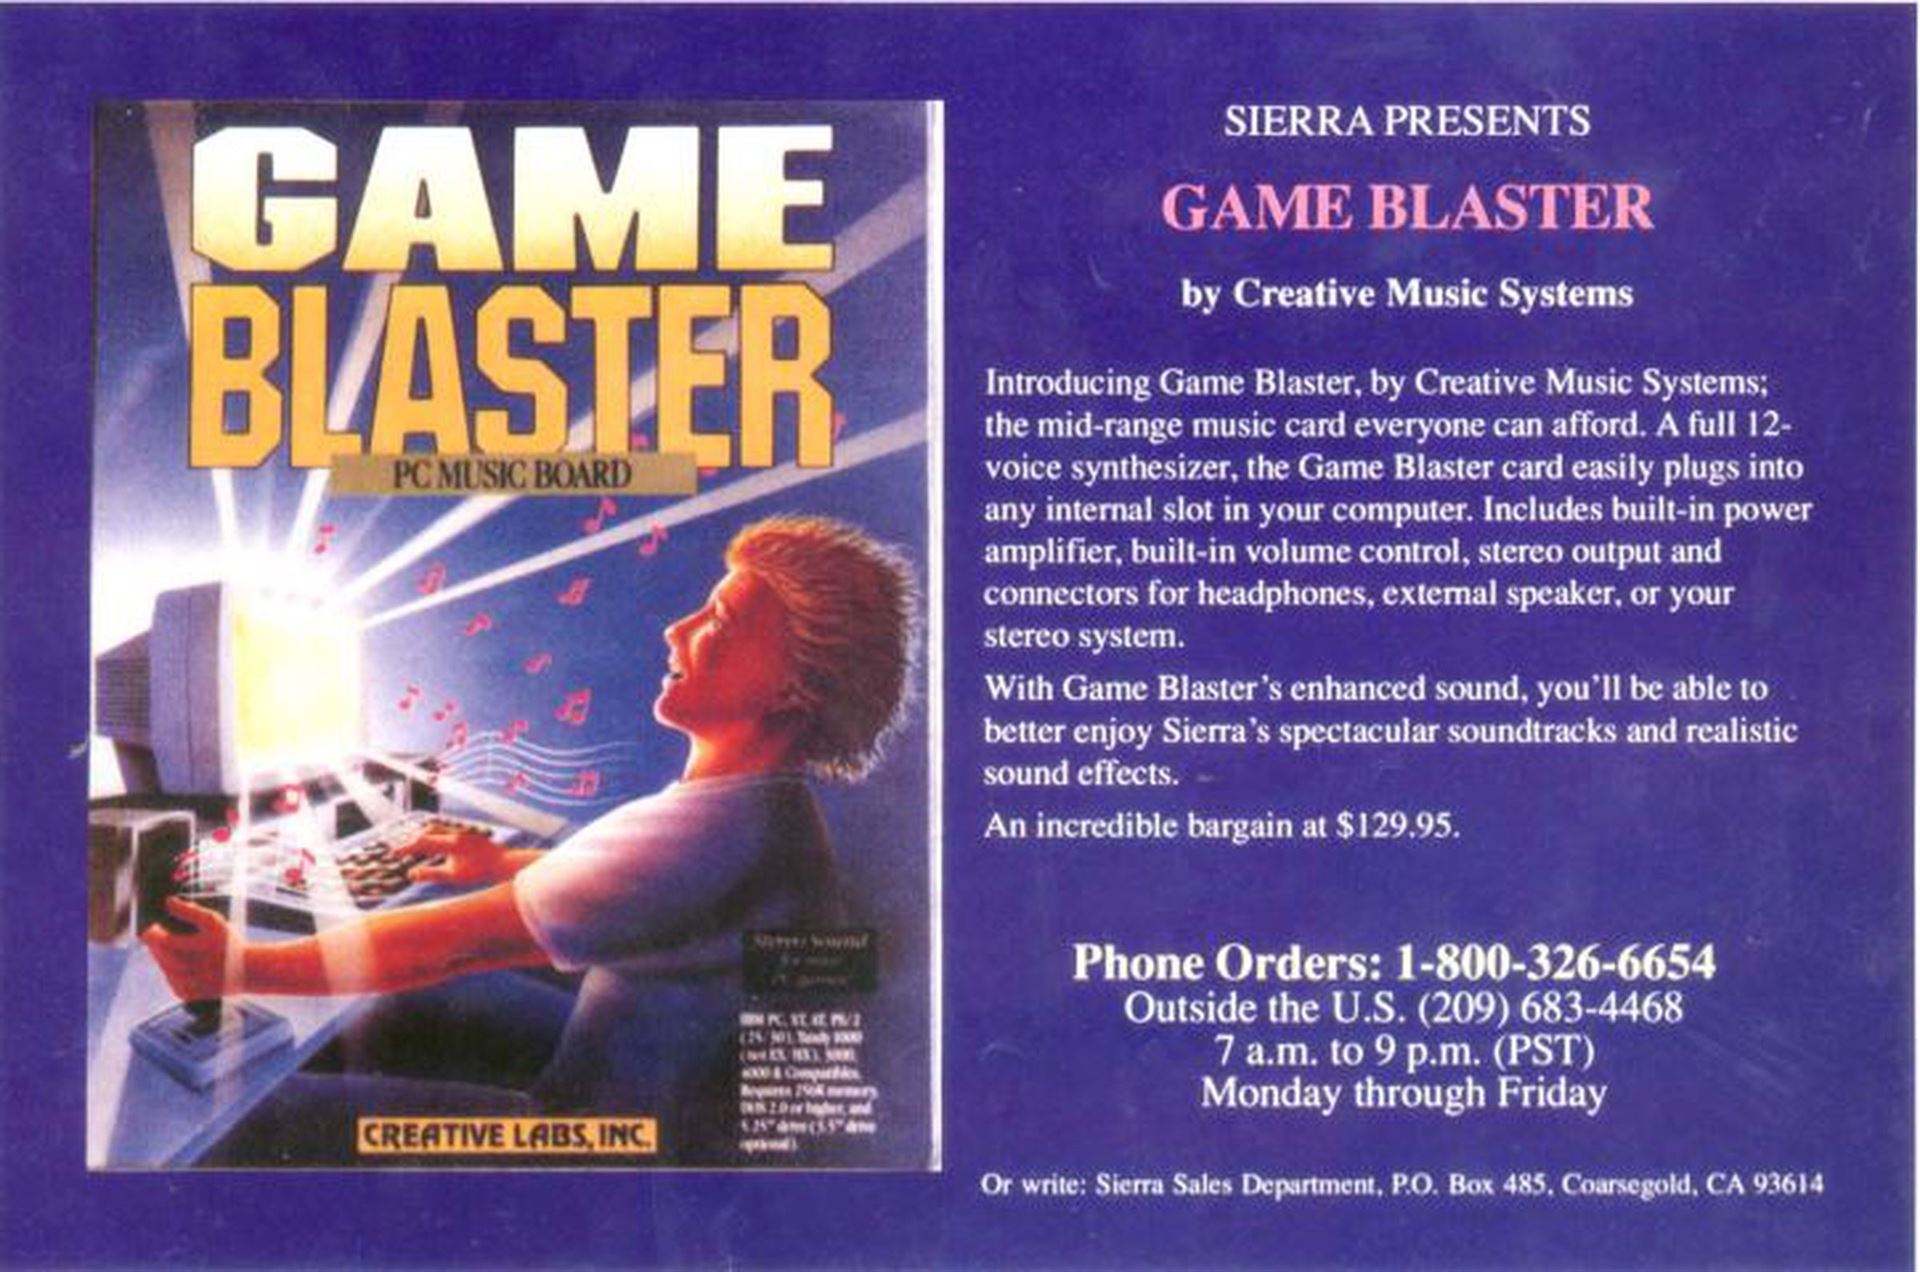 Archival image of an ad for the Game Blaster PC Music Board. It reads, in part: Sierra presents Game Blaster by Creative Music Systems. The mid-range music card everyone can afford. A full 12-voice synthesizer, the Game Blaster card easily plugs into any internal slot in your computer. Includes built-in power amplifier, built-in volume control, stereo output and connectors for headphones, external speaker, or your stereo system. 